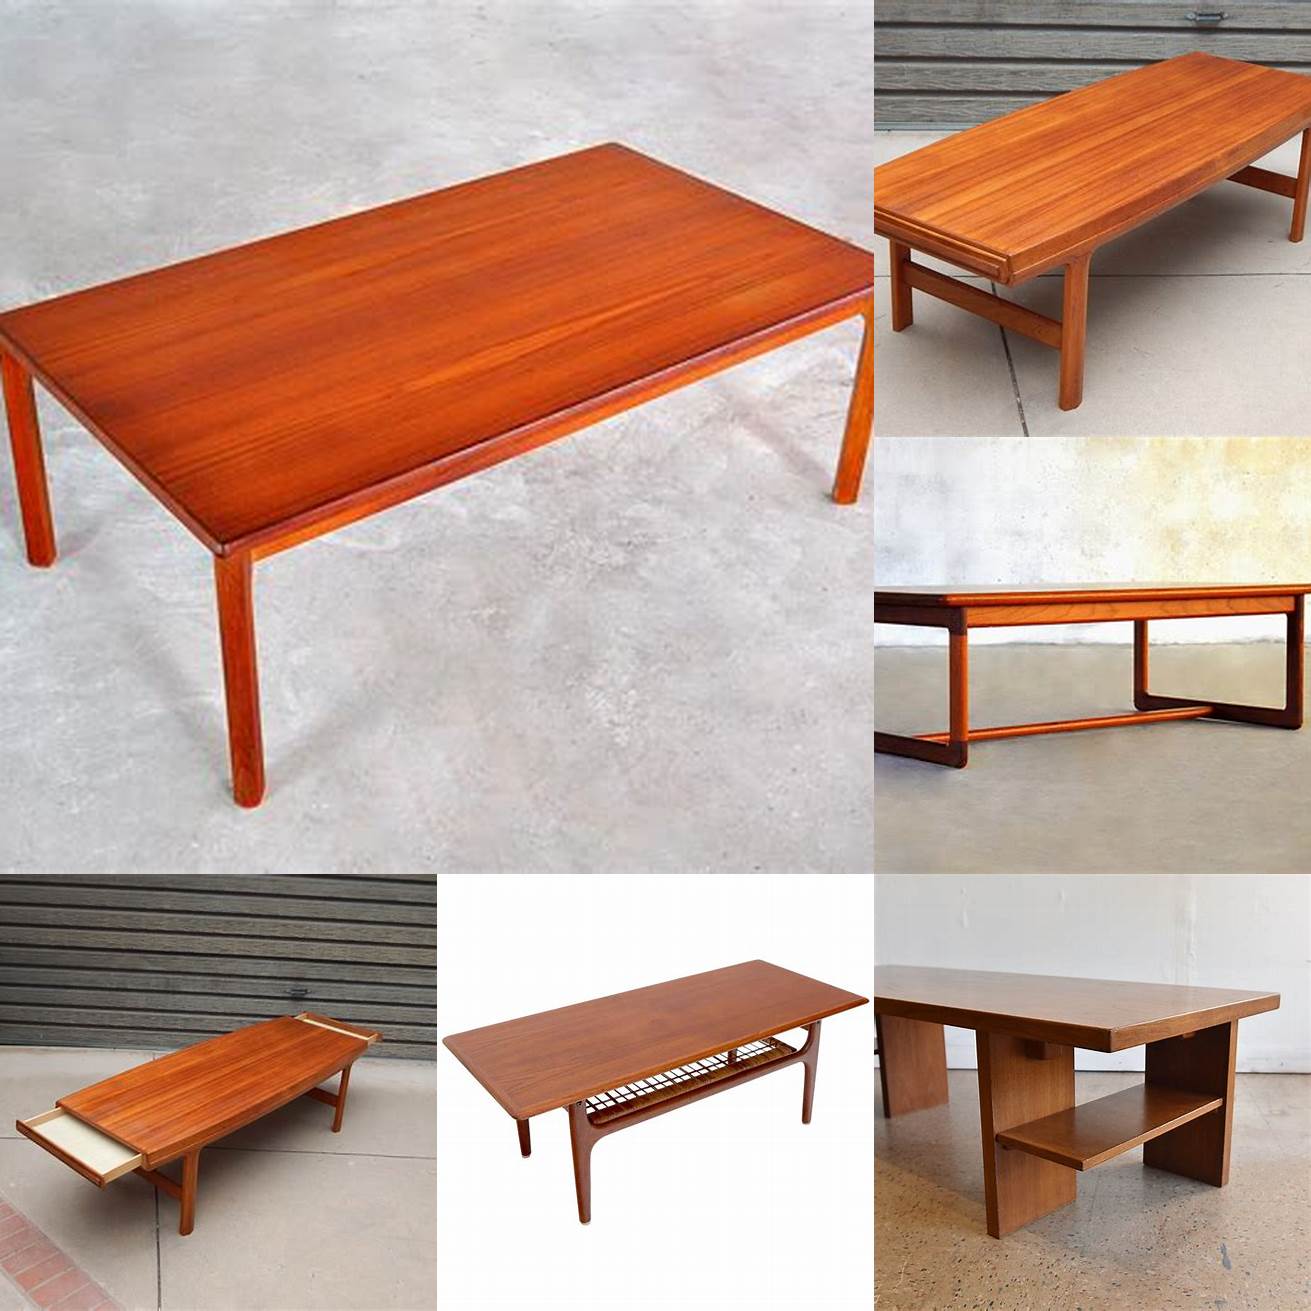 A contemporary teak coffee table